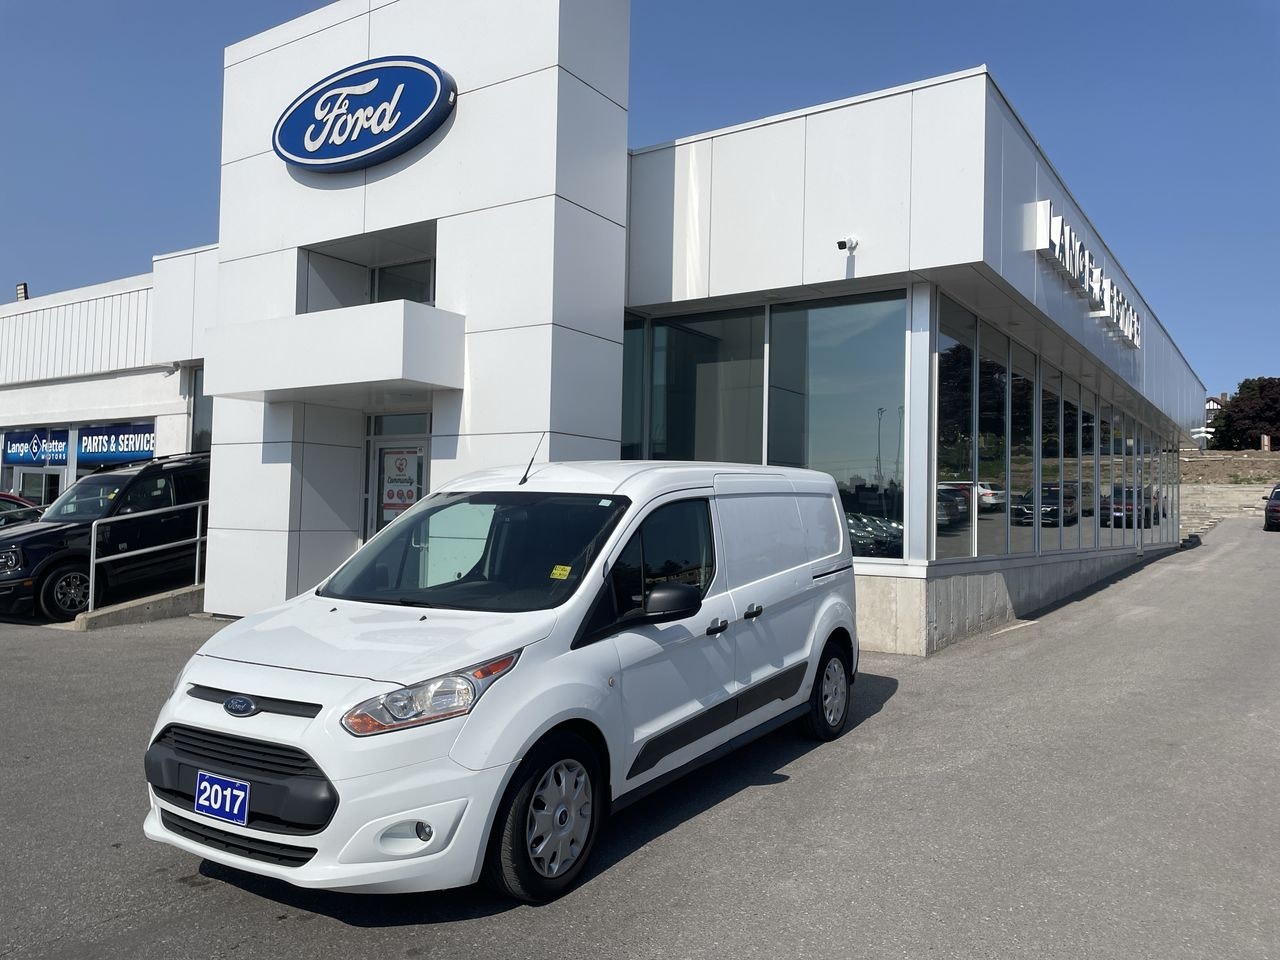 2017 Ford Transit Connect - P21401 Full Image 1